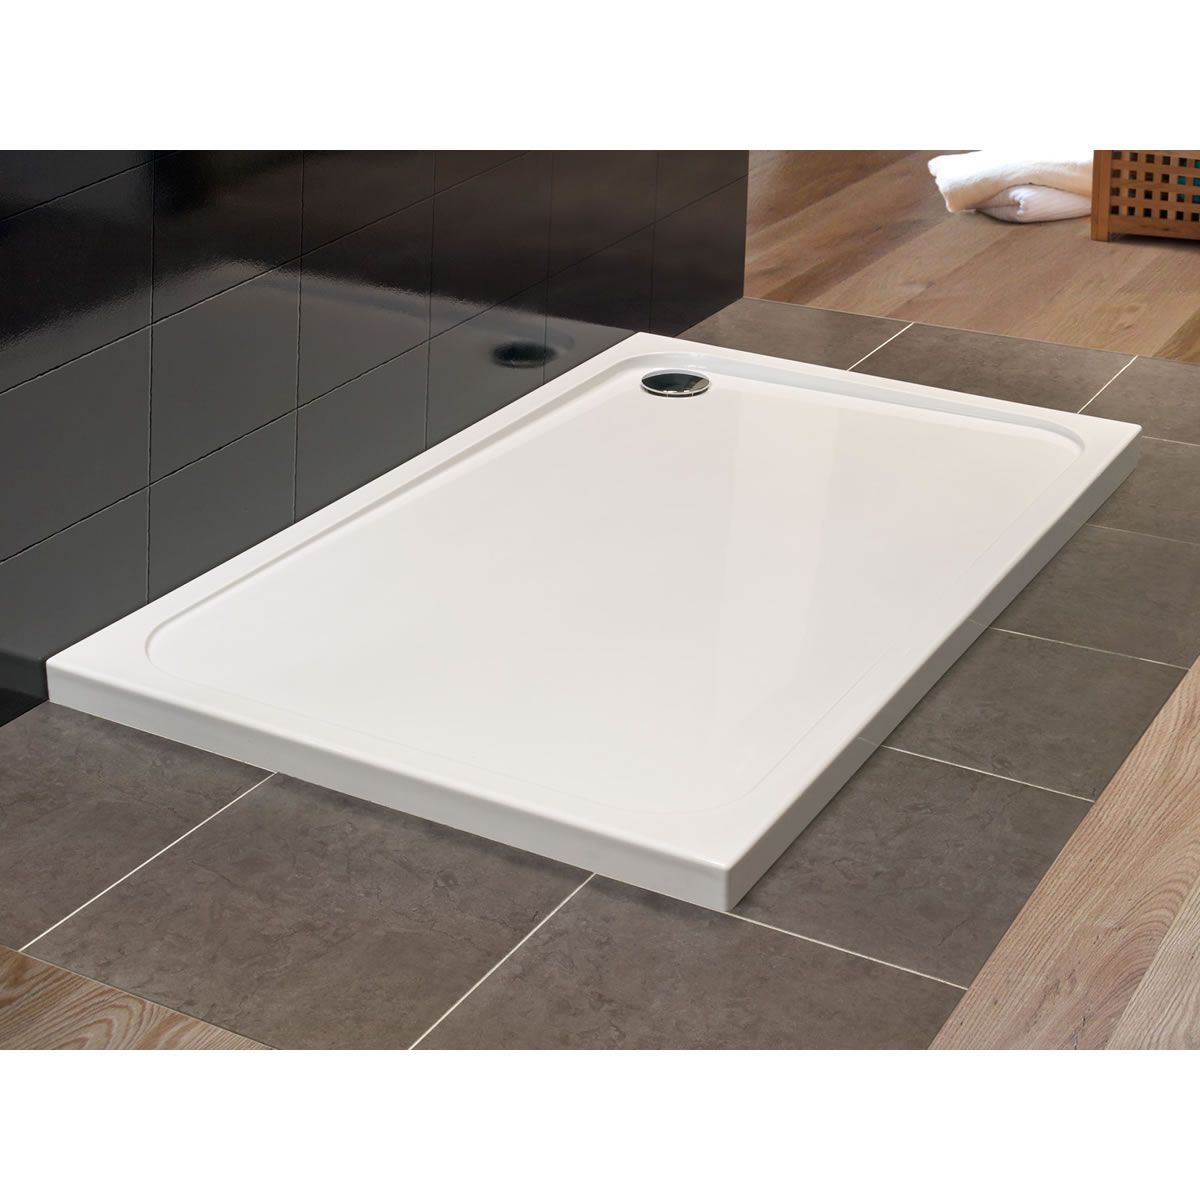 The Merlyn MStone 50mm Low Profile Large Rectangular Shower Tray